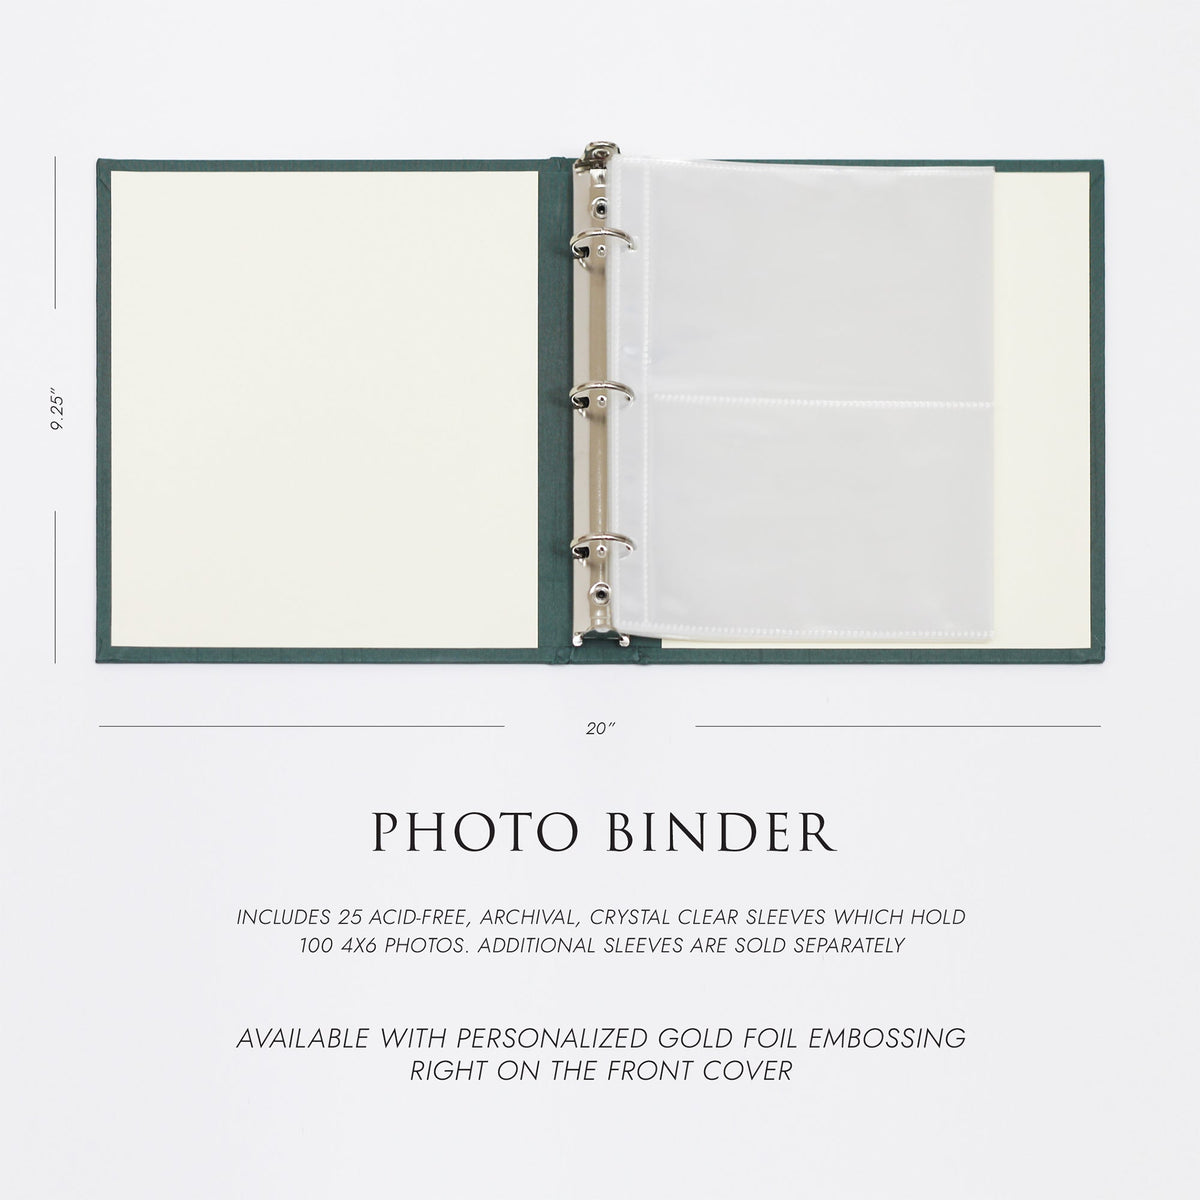 Medium Photo Binder For 4x6 Photos | Cover: Black Vegan Leather | Available Personalized